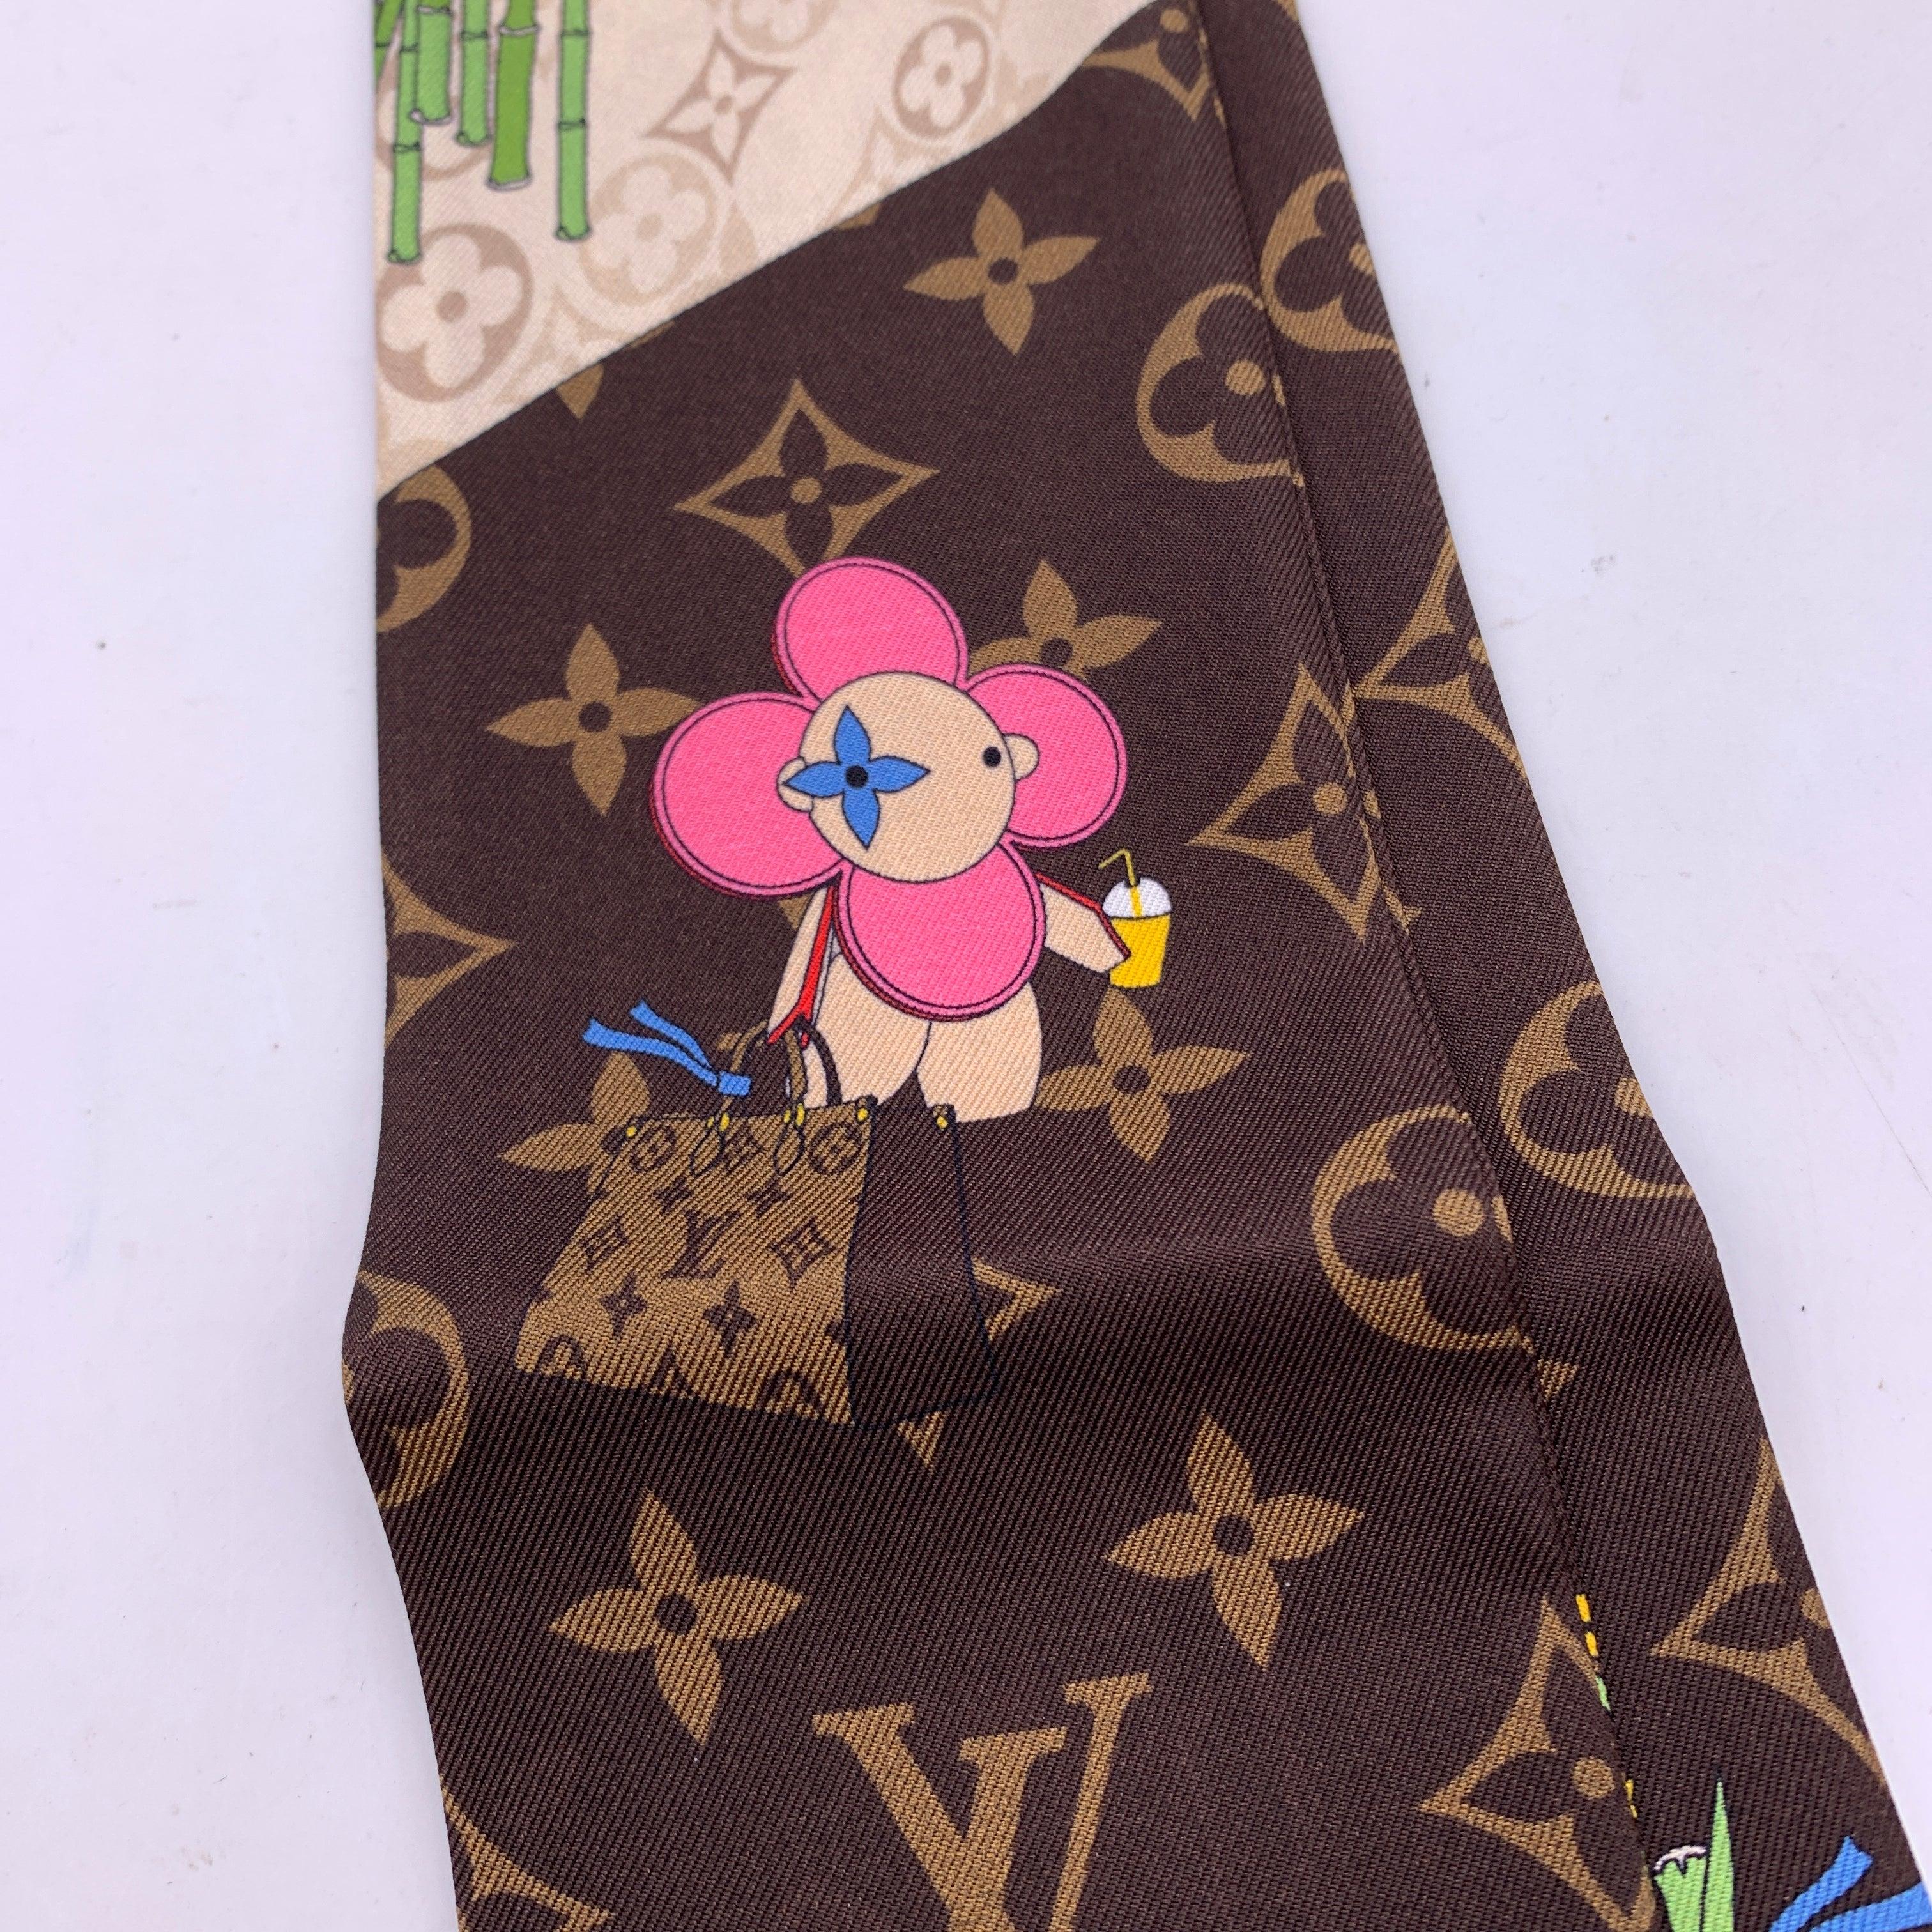 Louis Vuitton 'China Wall' silk bandeau with Vivienne mascot and Panda design. Composition: 100% Silk. Total length: 46.5 inches - 118 cm. Width: 3 inches - 8 cm. Made in Italy. Details MATERIAL: Silk COLOR: Multicolour MODEL: Illustre China Wall